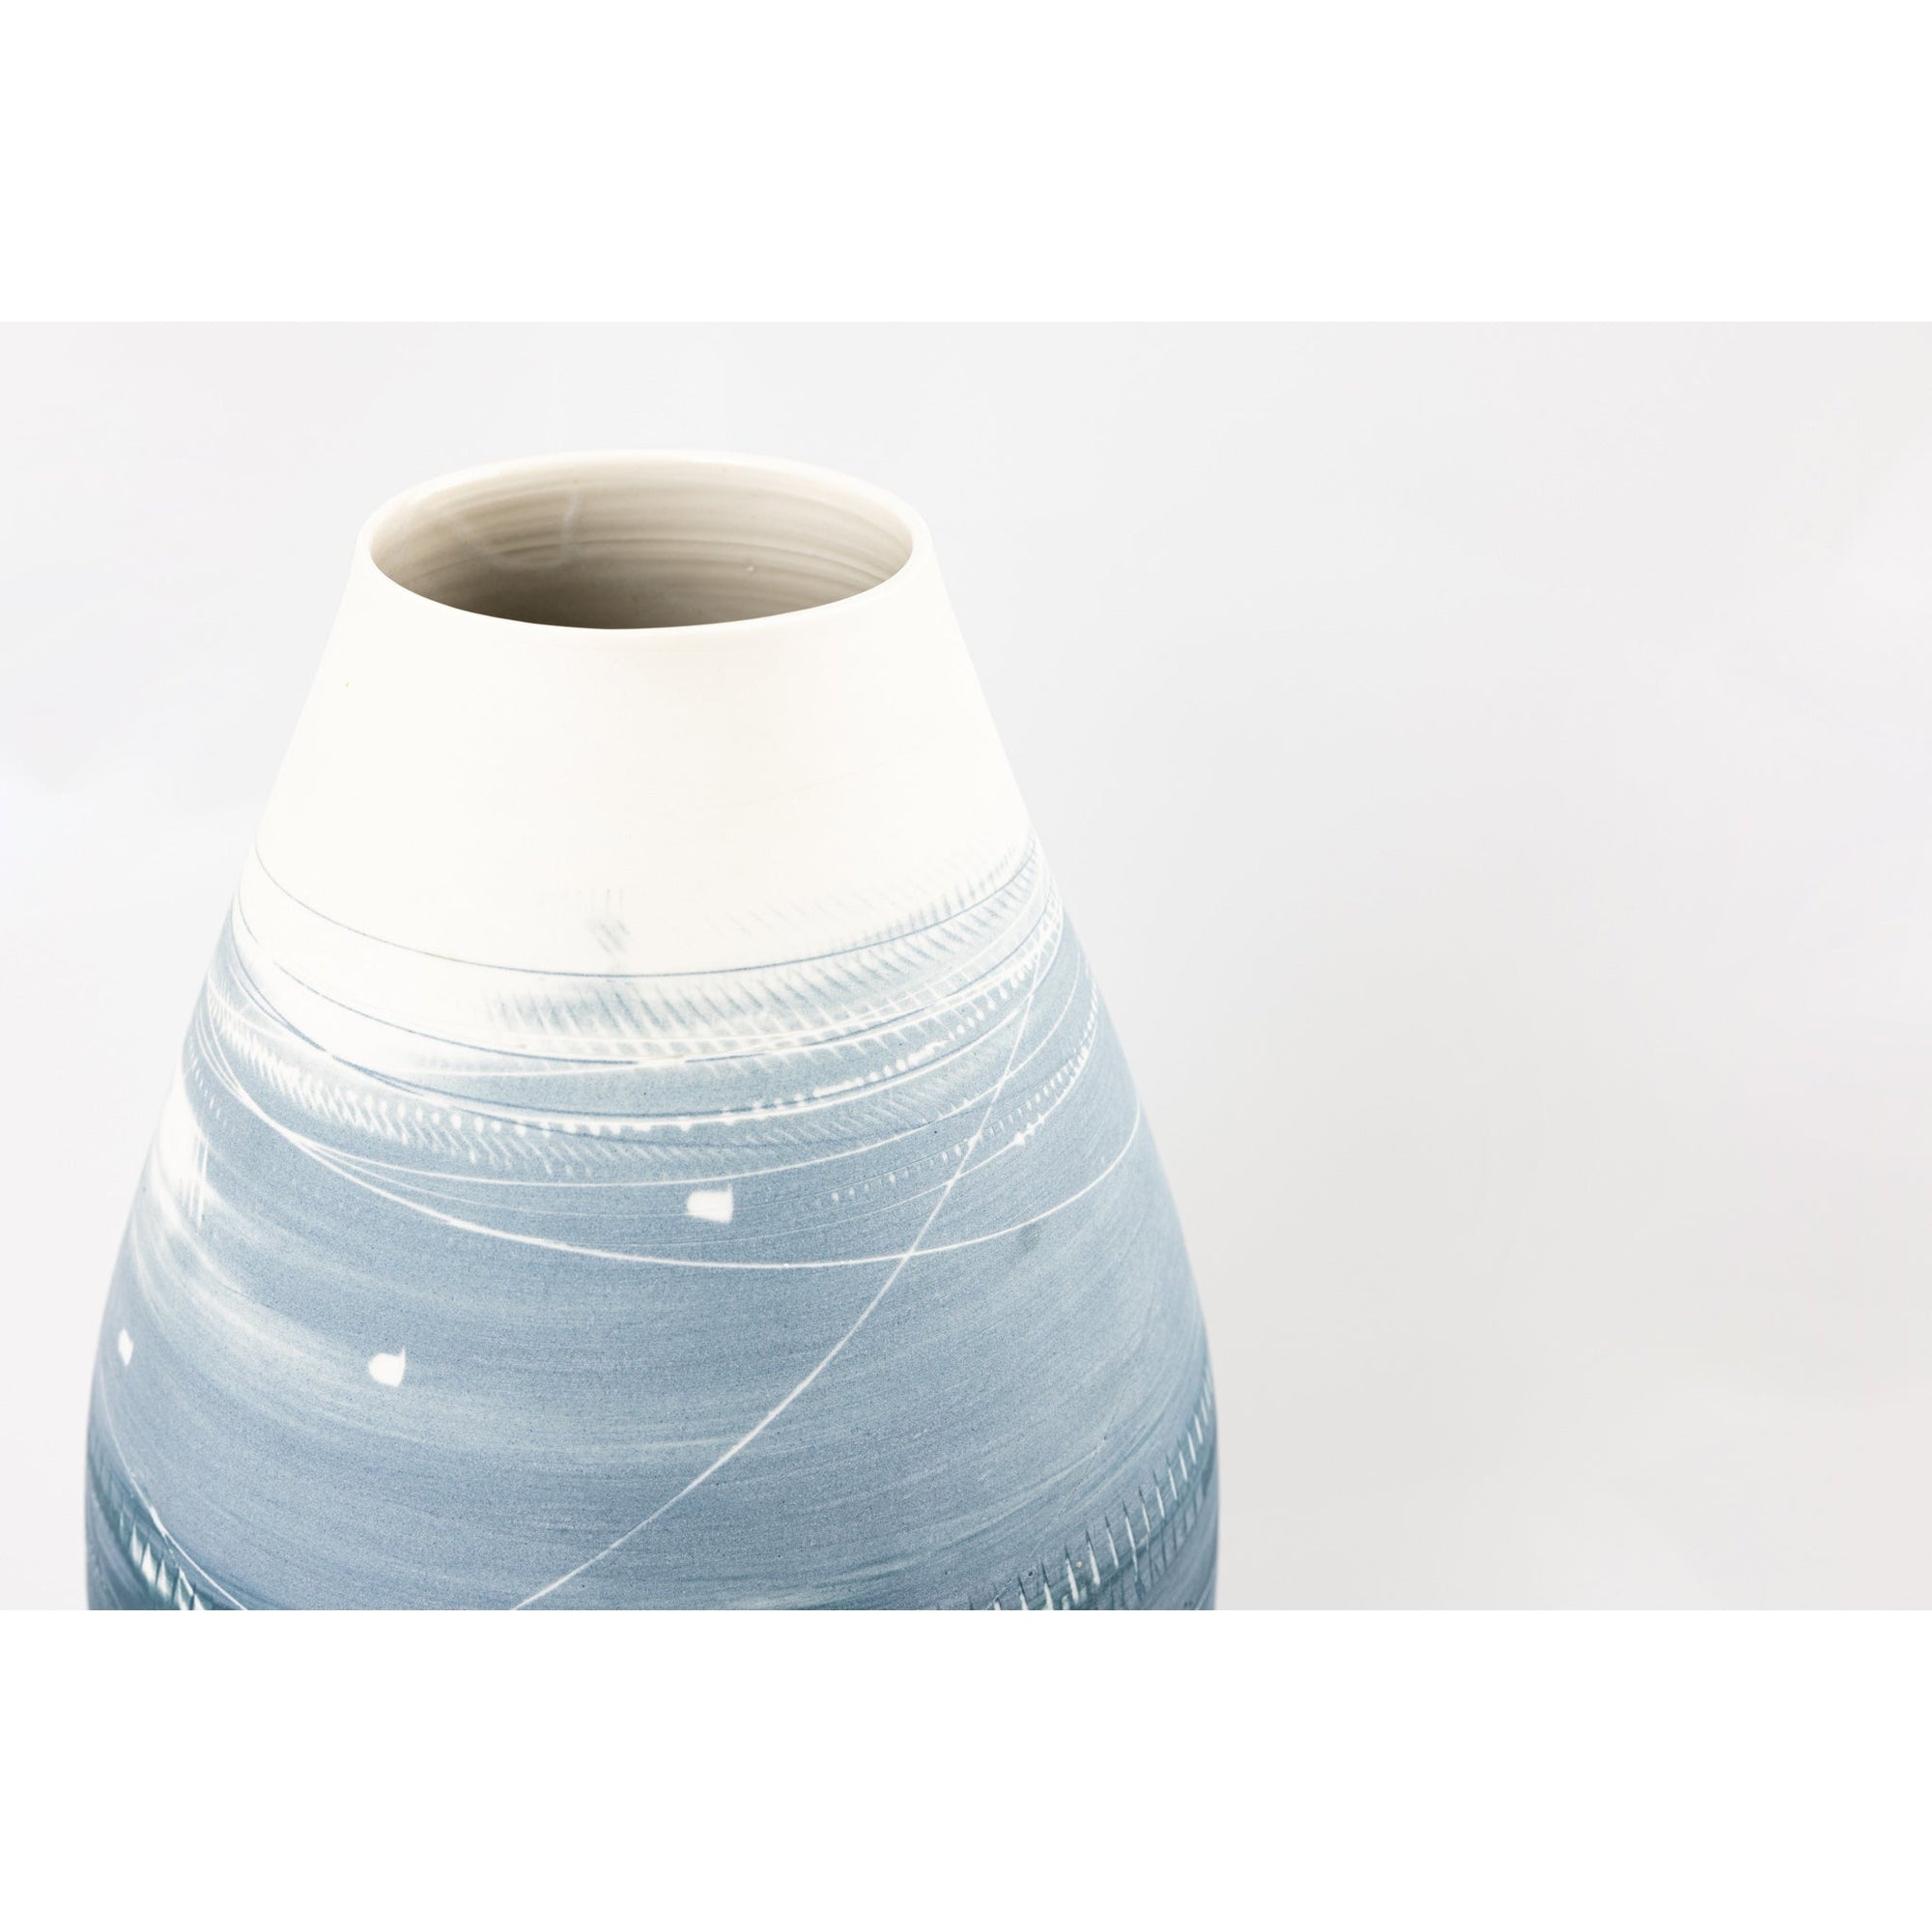 AT82 Tall Oval Vase, by Ali Tomlin, available at Padstow Gallery, Cornwall